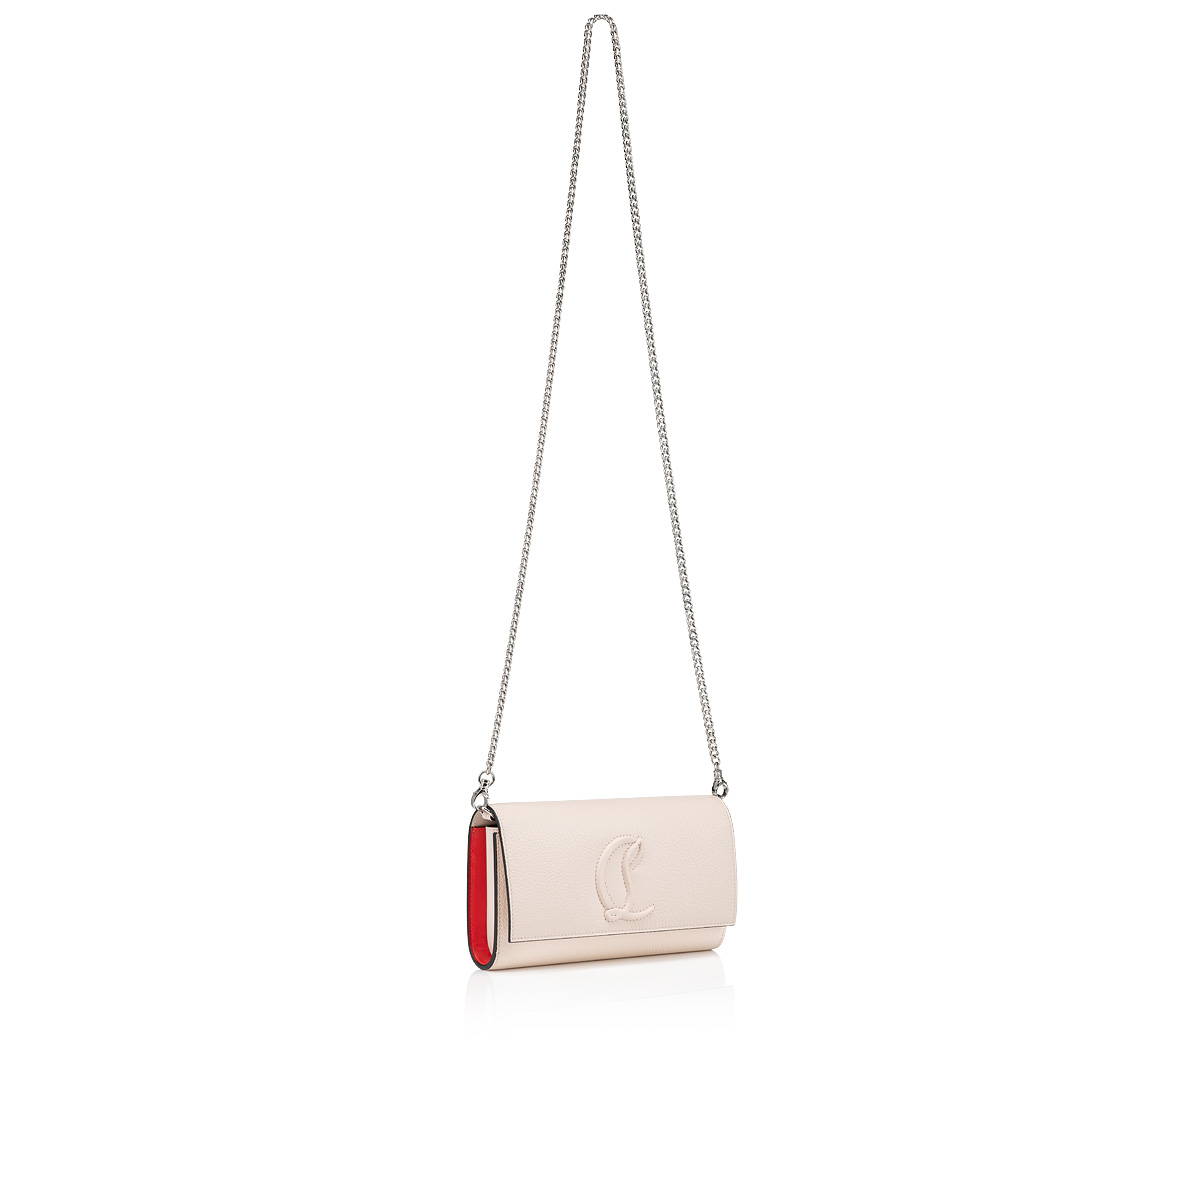 CHRISTIAN LOUBOUTIN: By My Sidewallet in leather with monogram